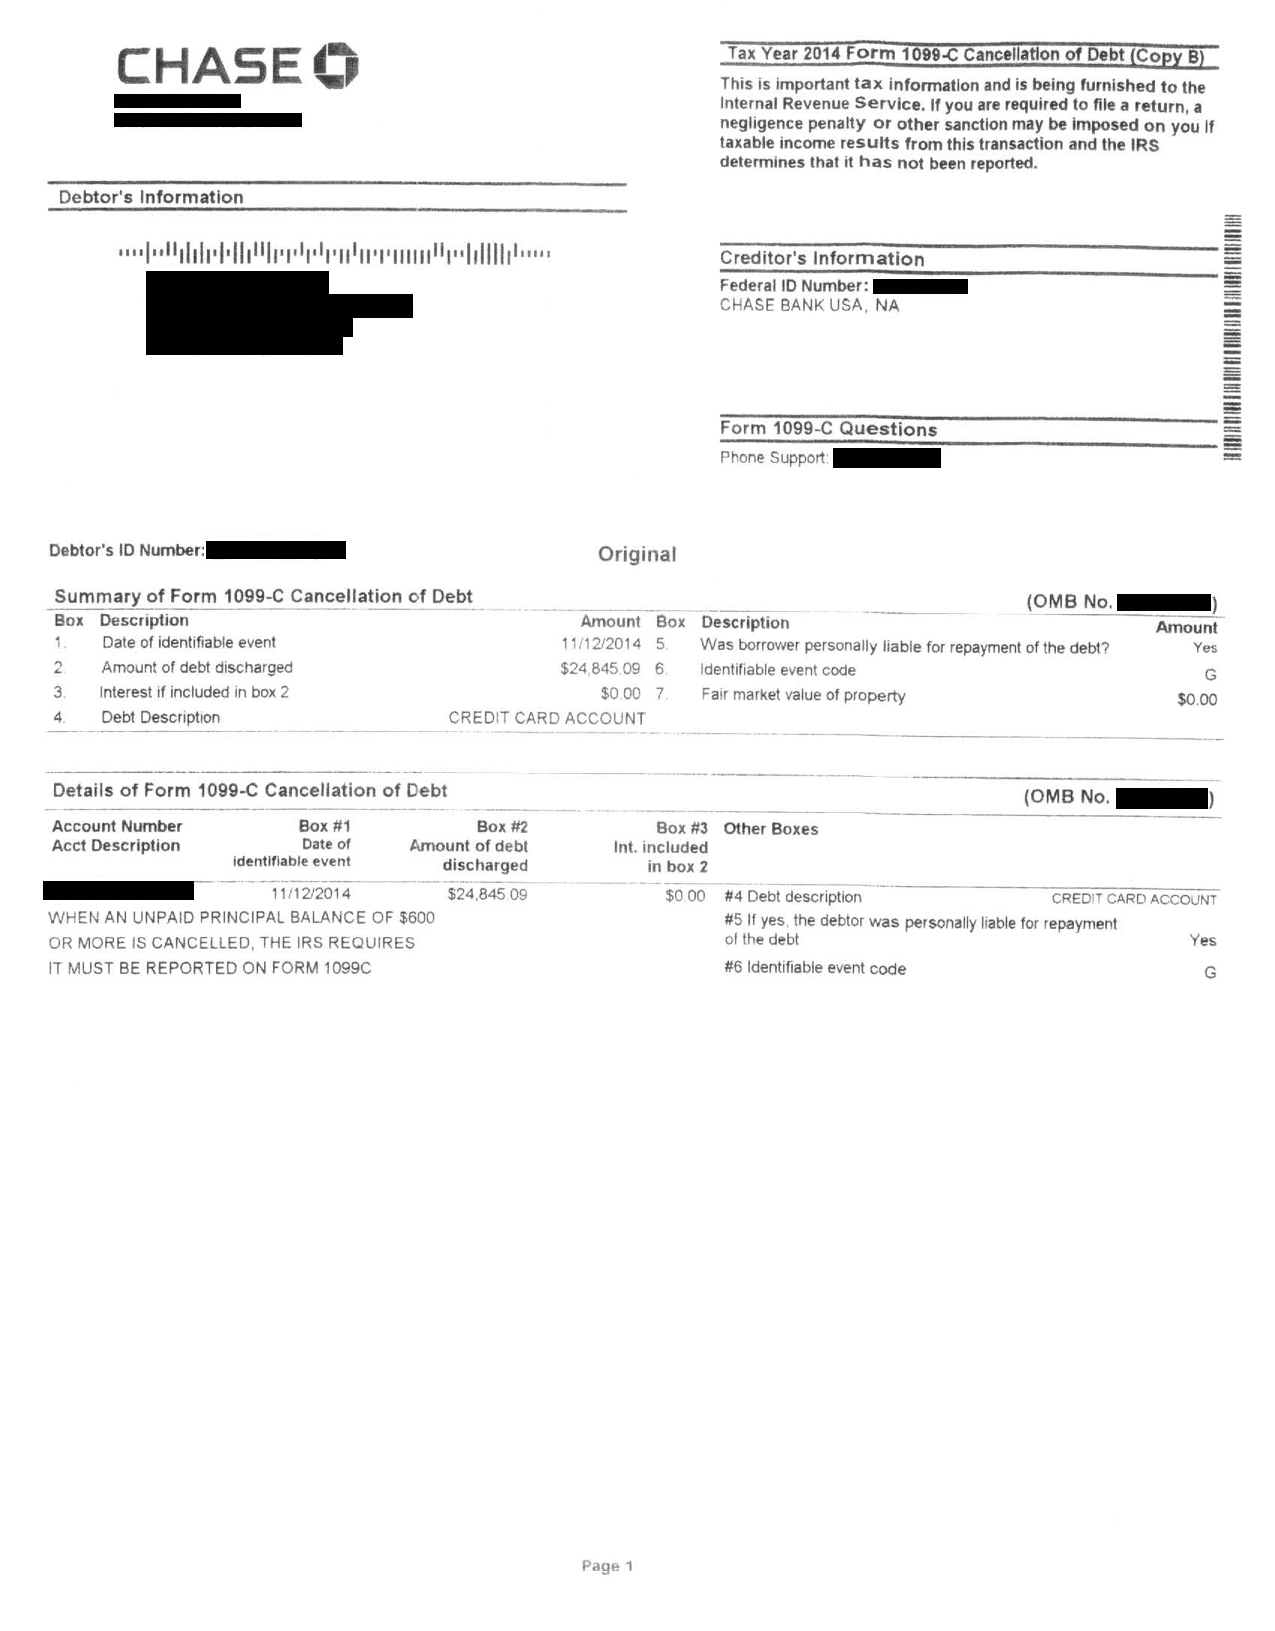 Image of a settlement letter with Chase Bank USA America with savings of 24,845 dollars